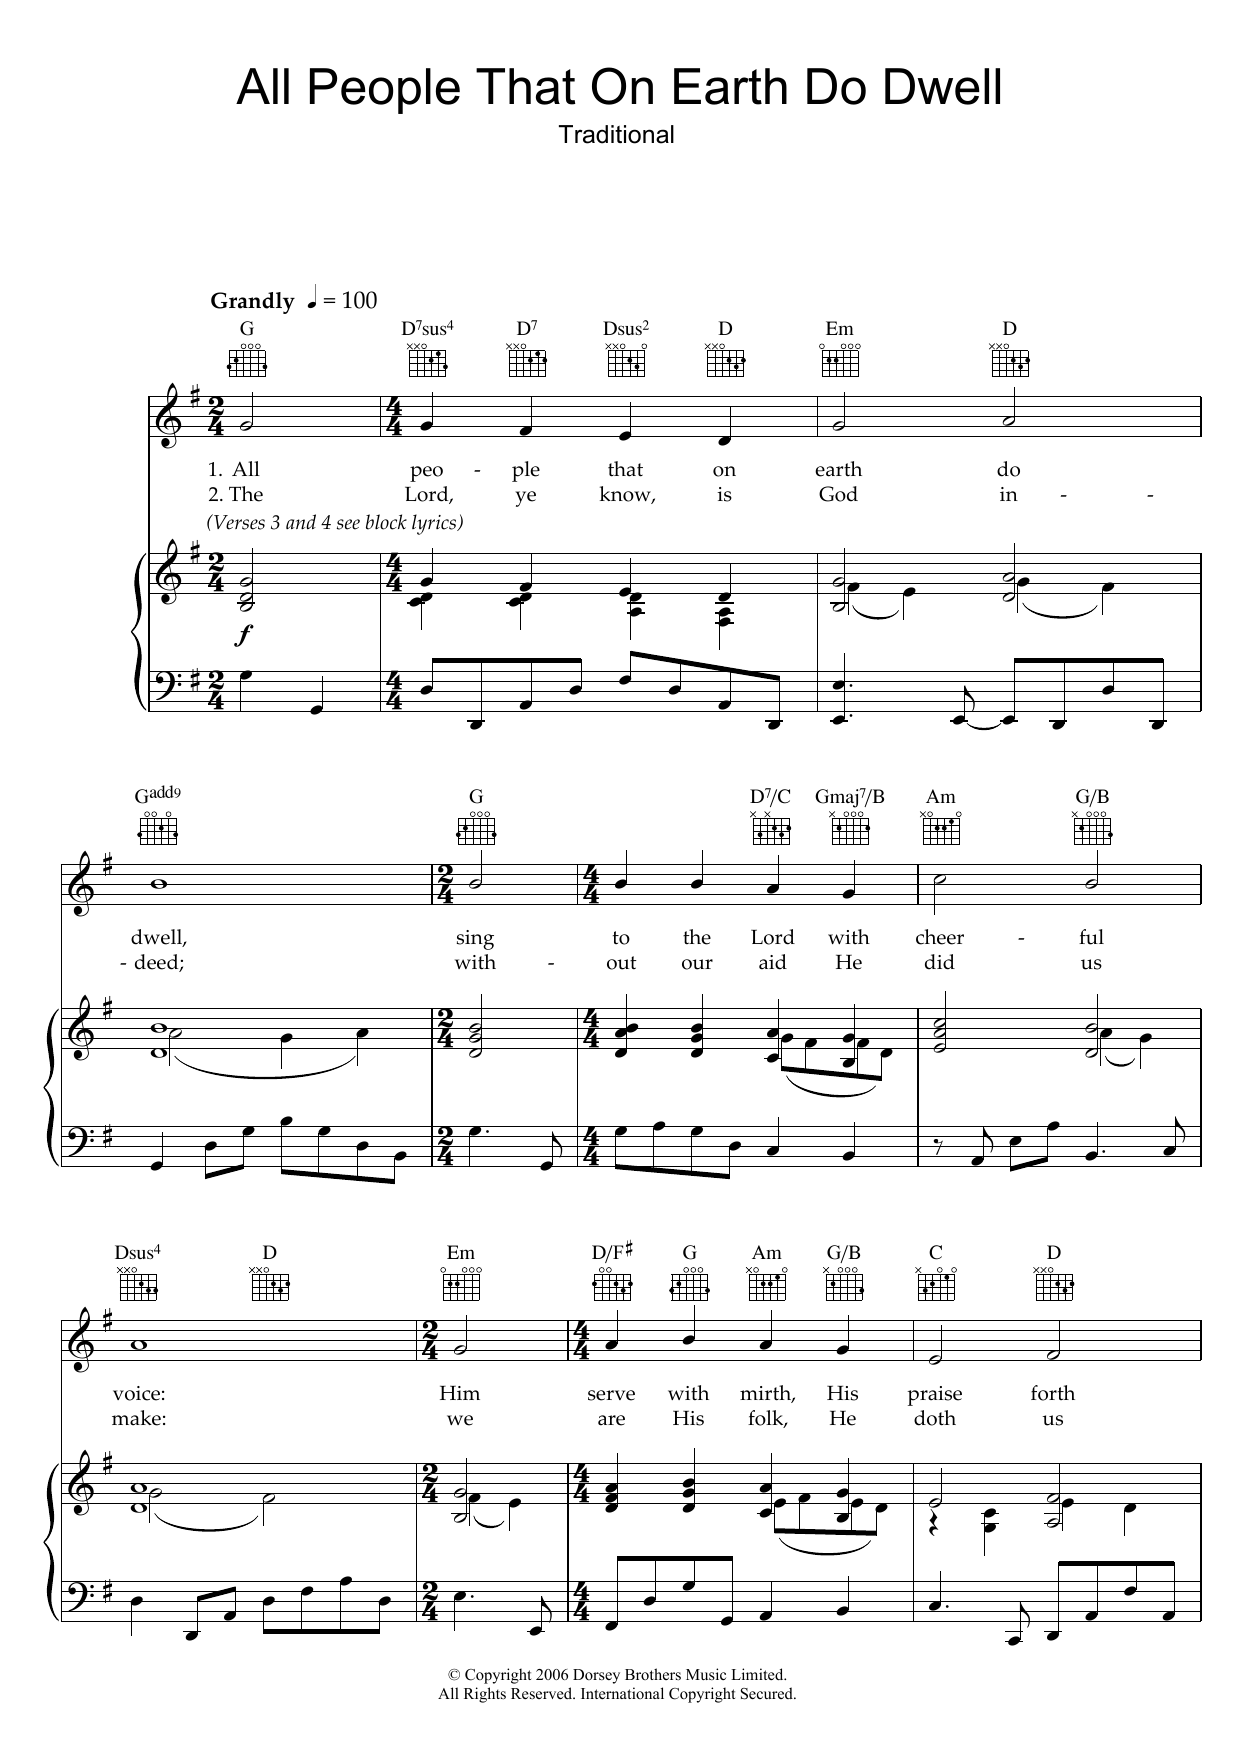 Download Traditional All People That On Earth Do Dwell Sheet Music